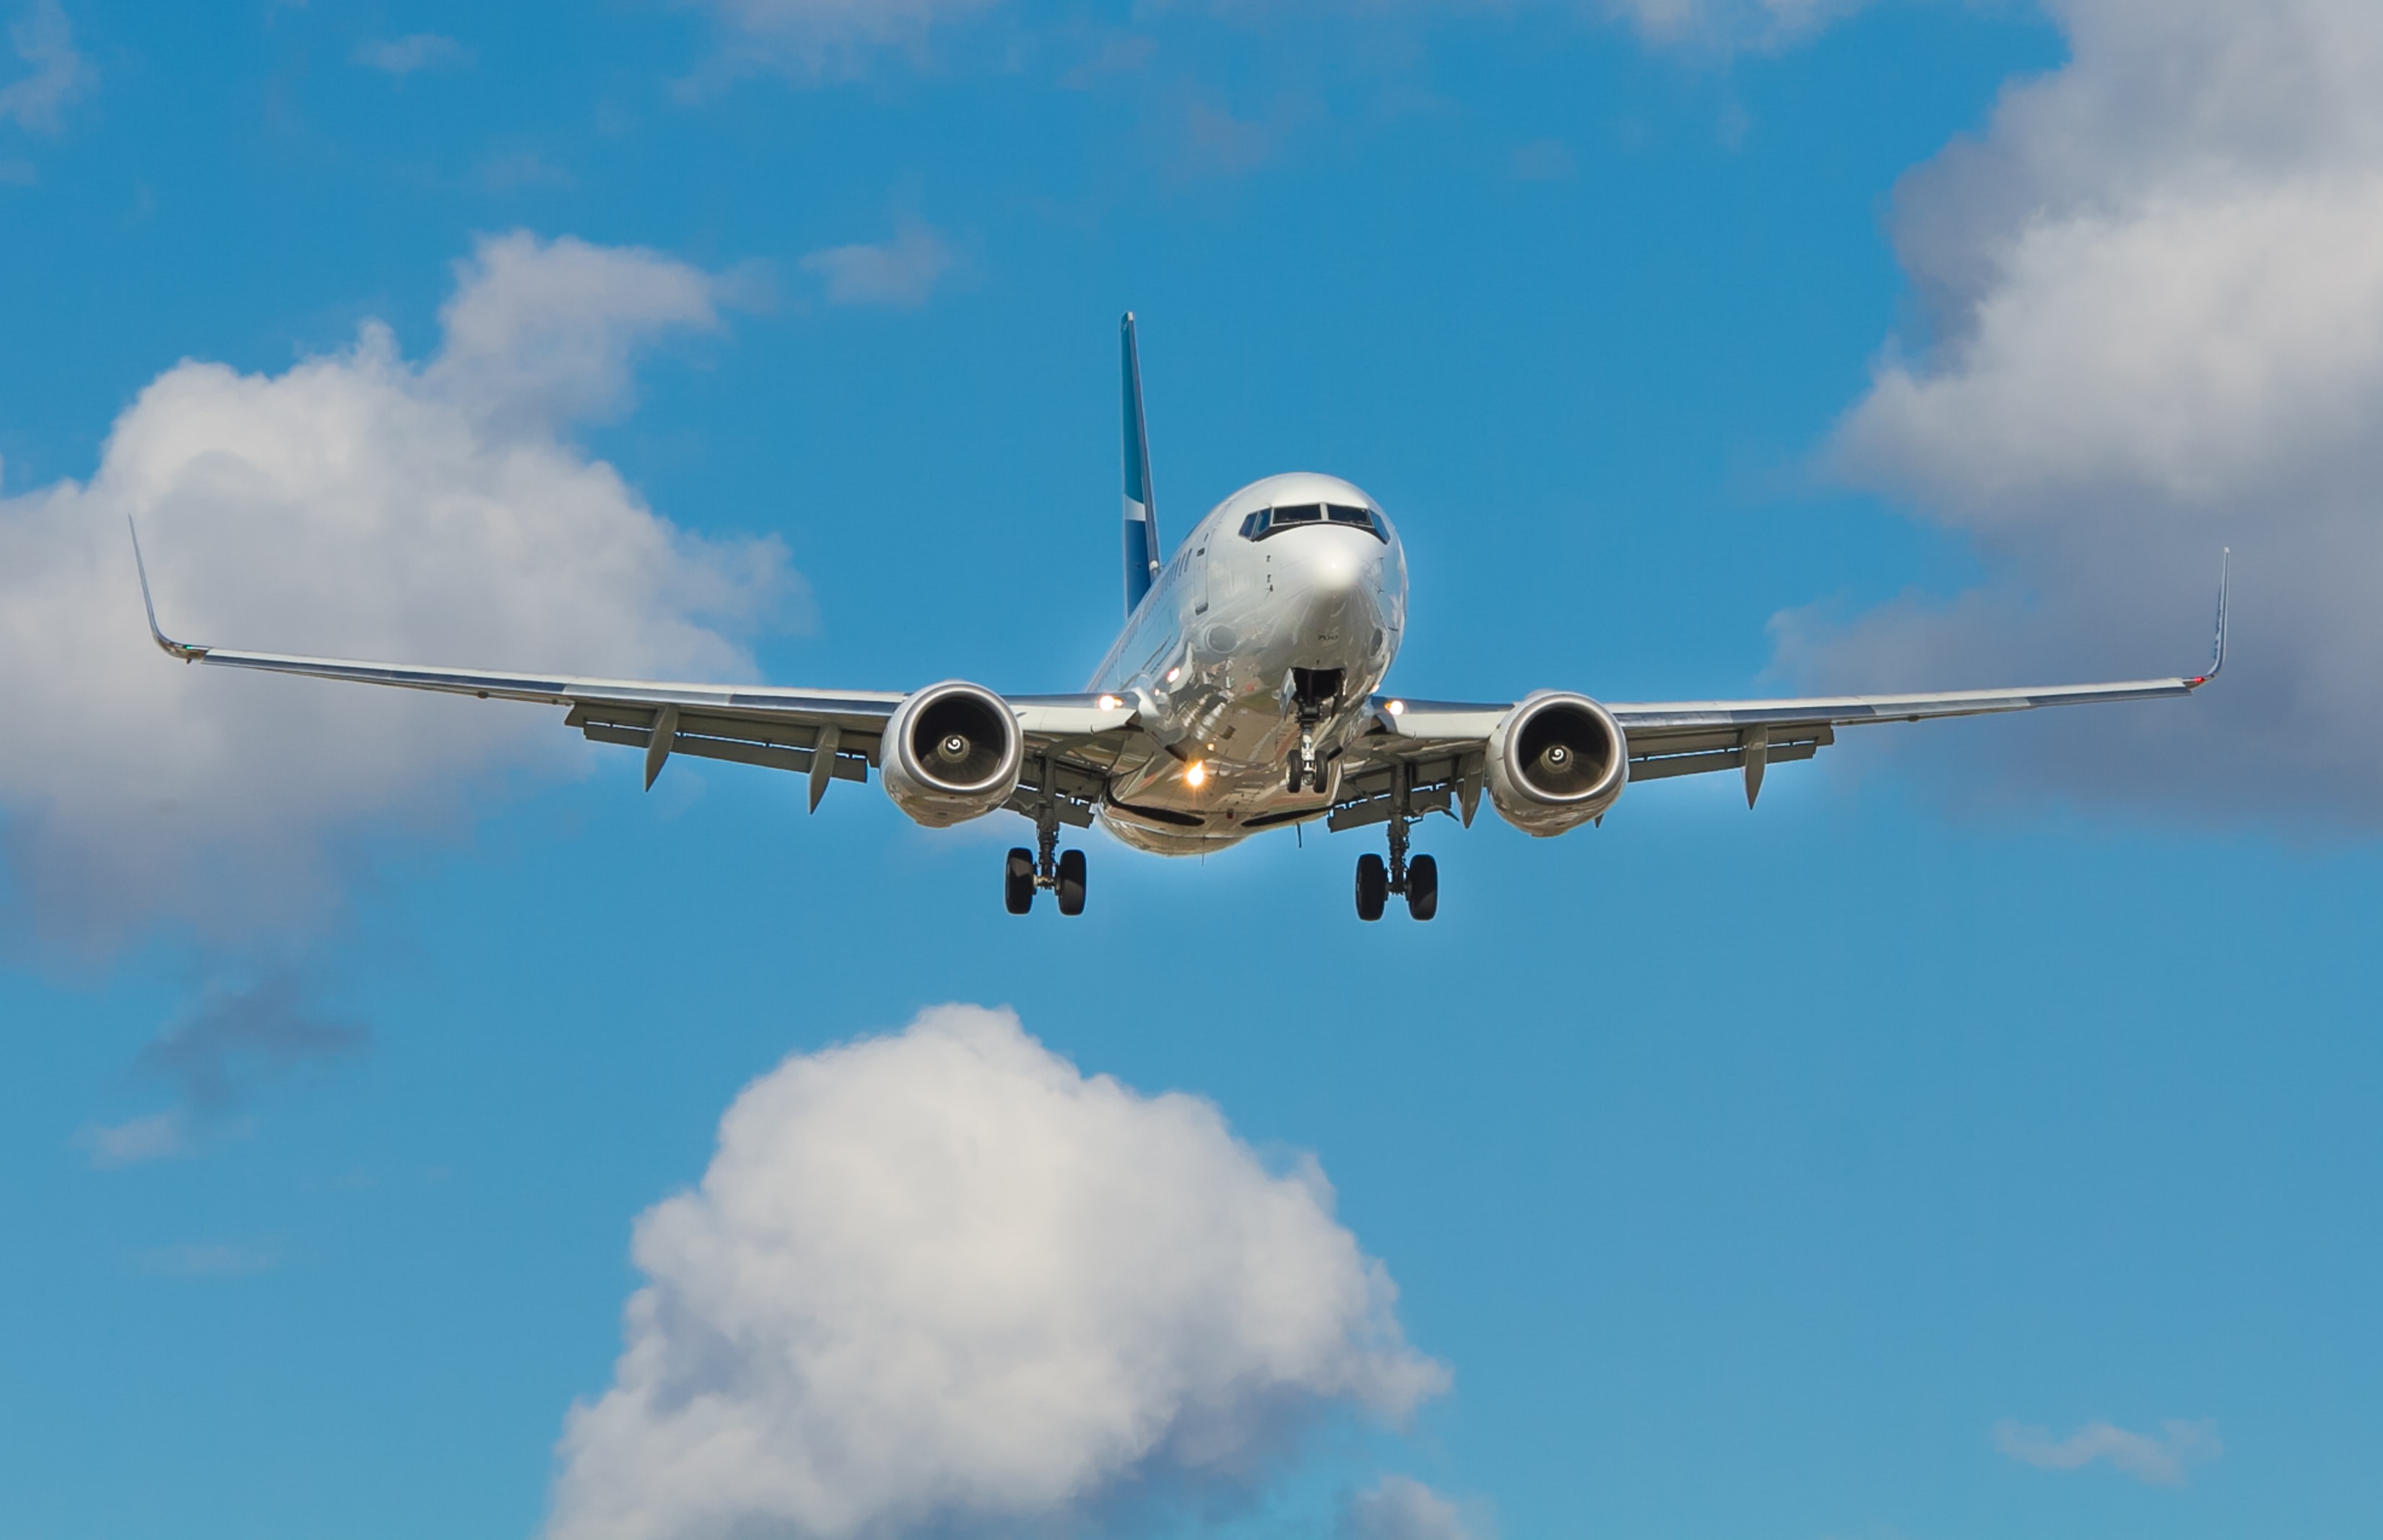 IATA and Travalyst Will Work Together to Calculate Flight CO2 Emissions